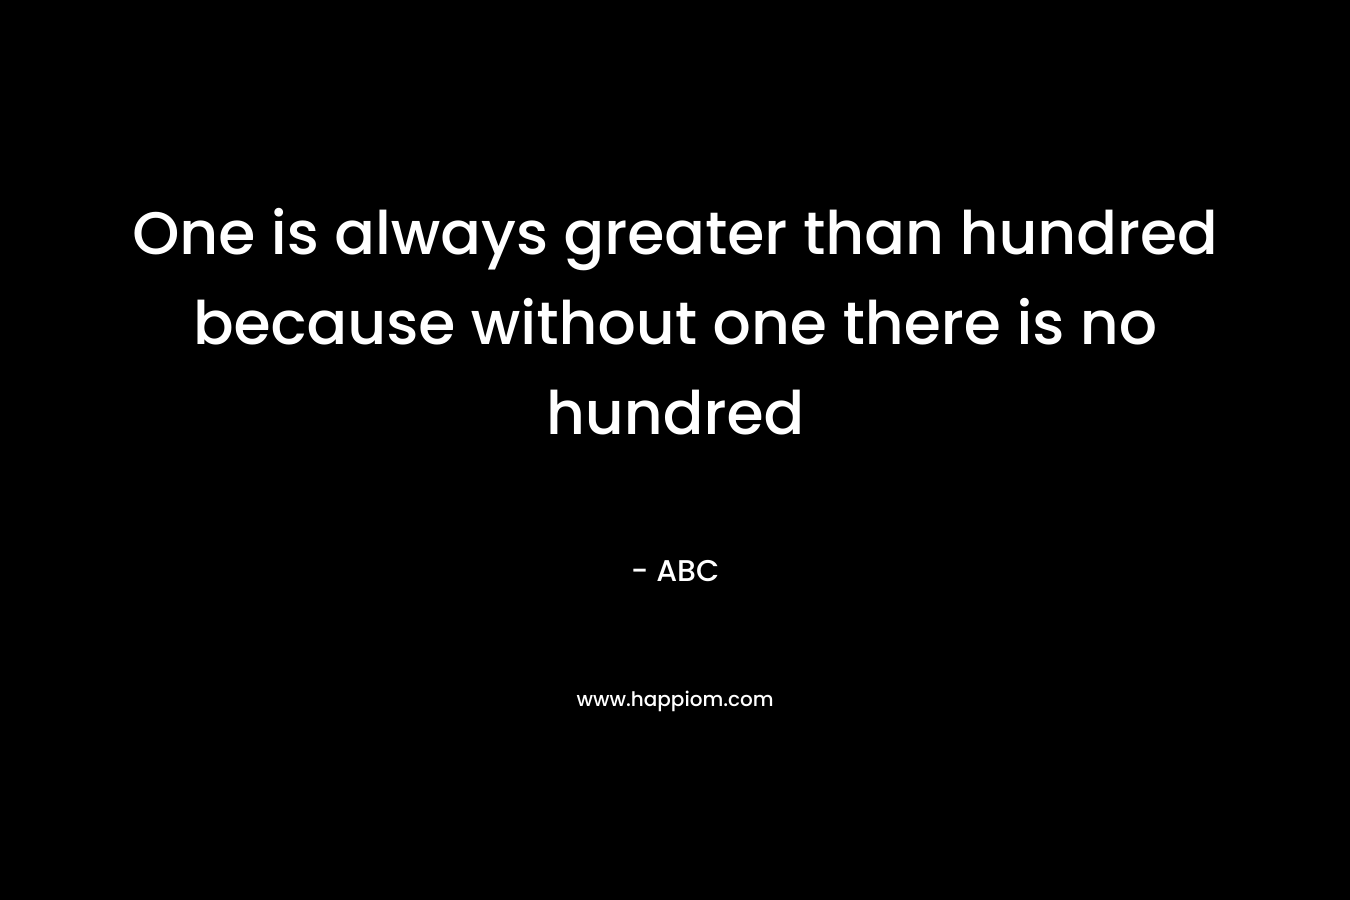 One is always greater than hundred because without one there is no hundred